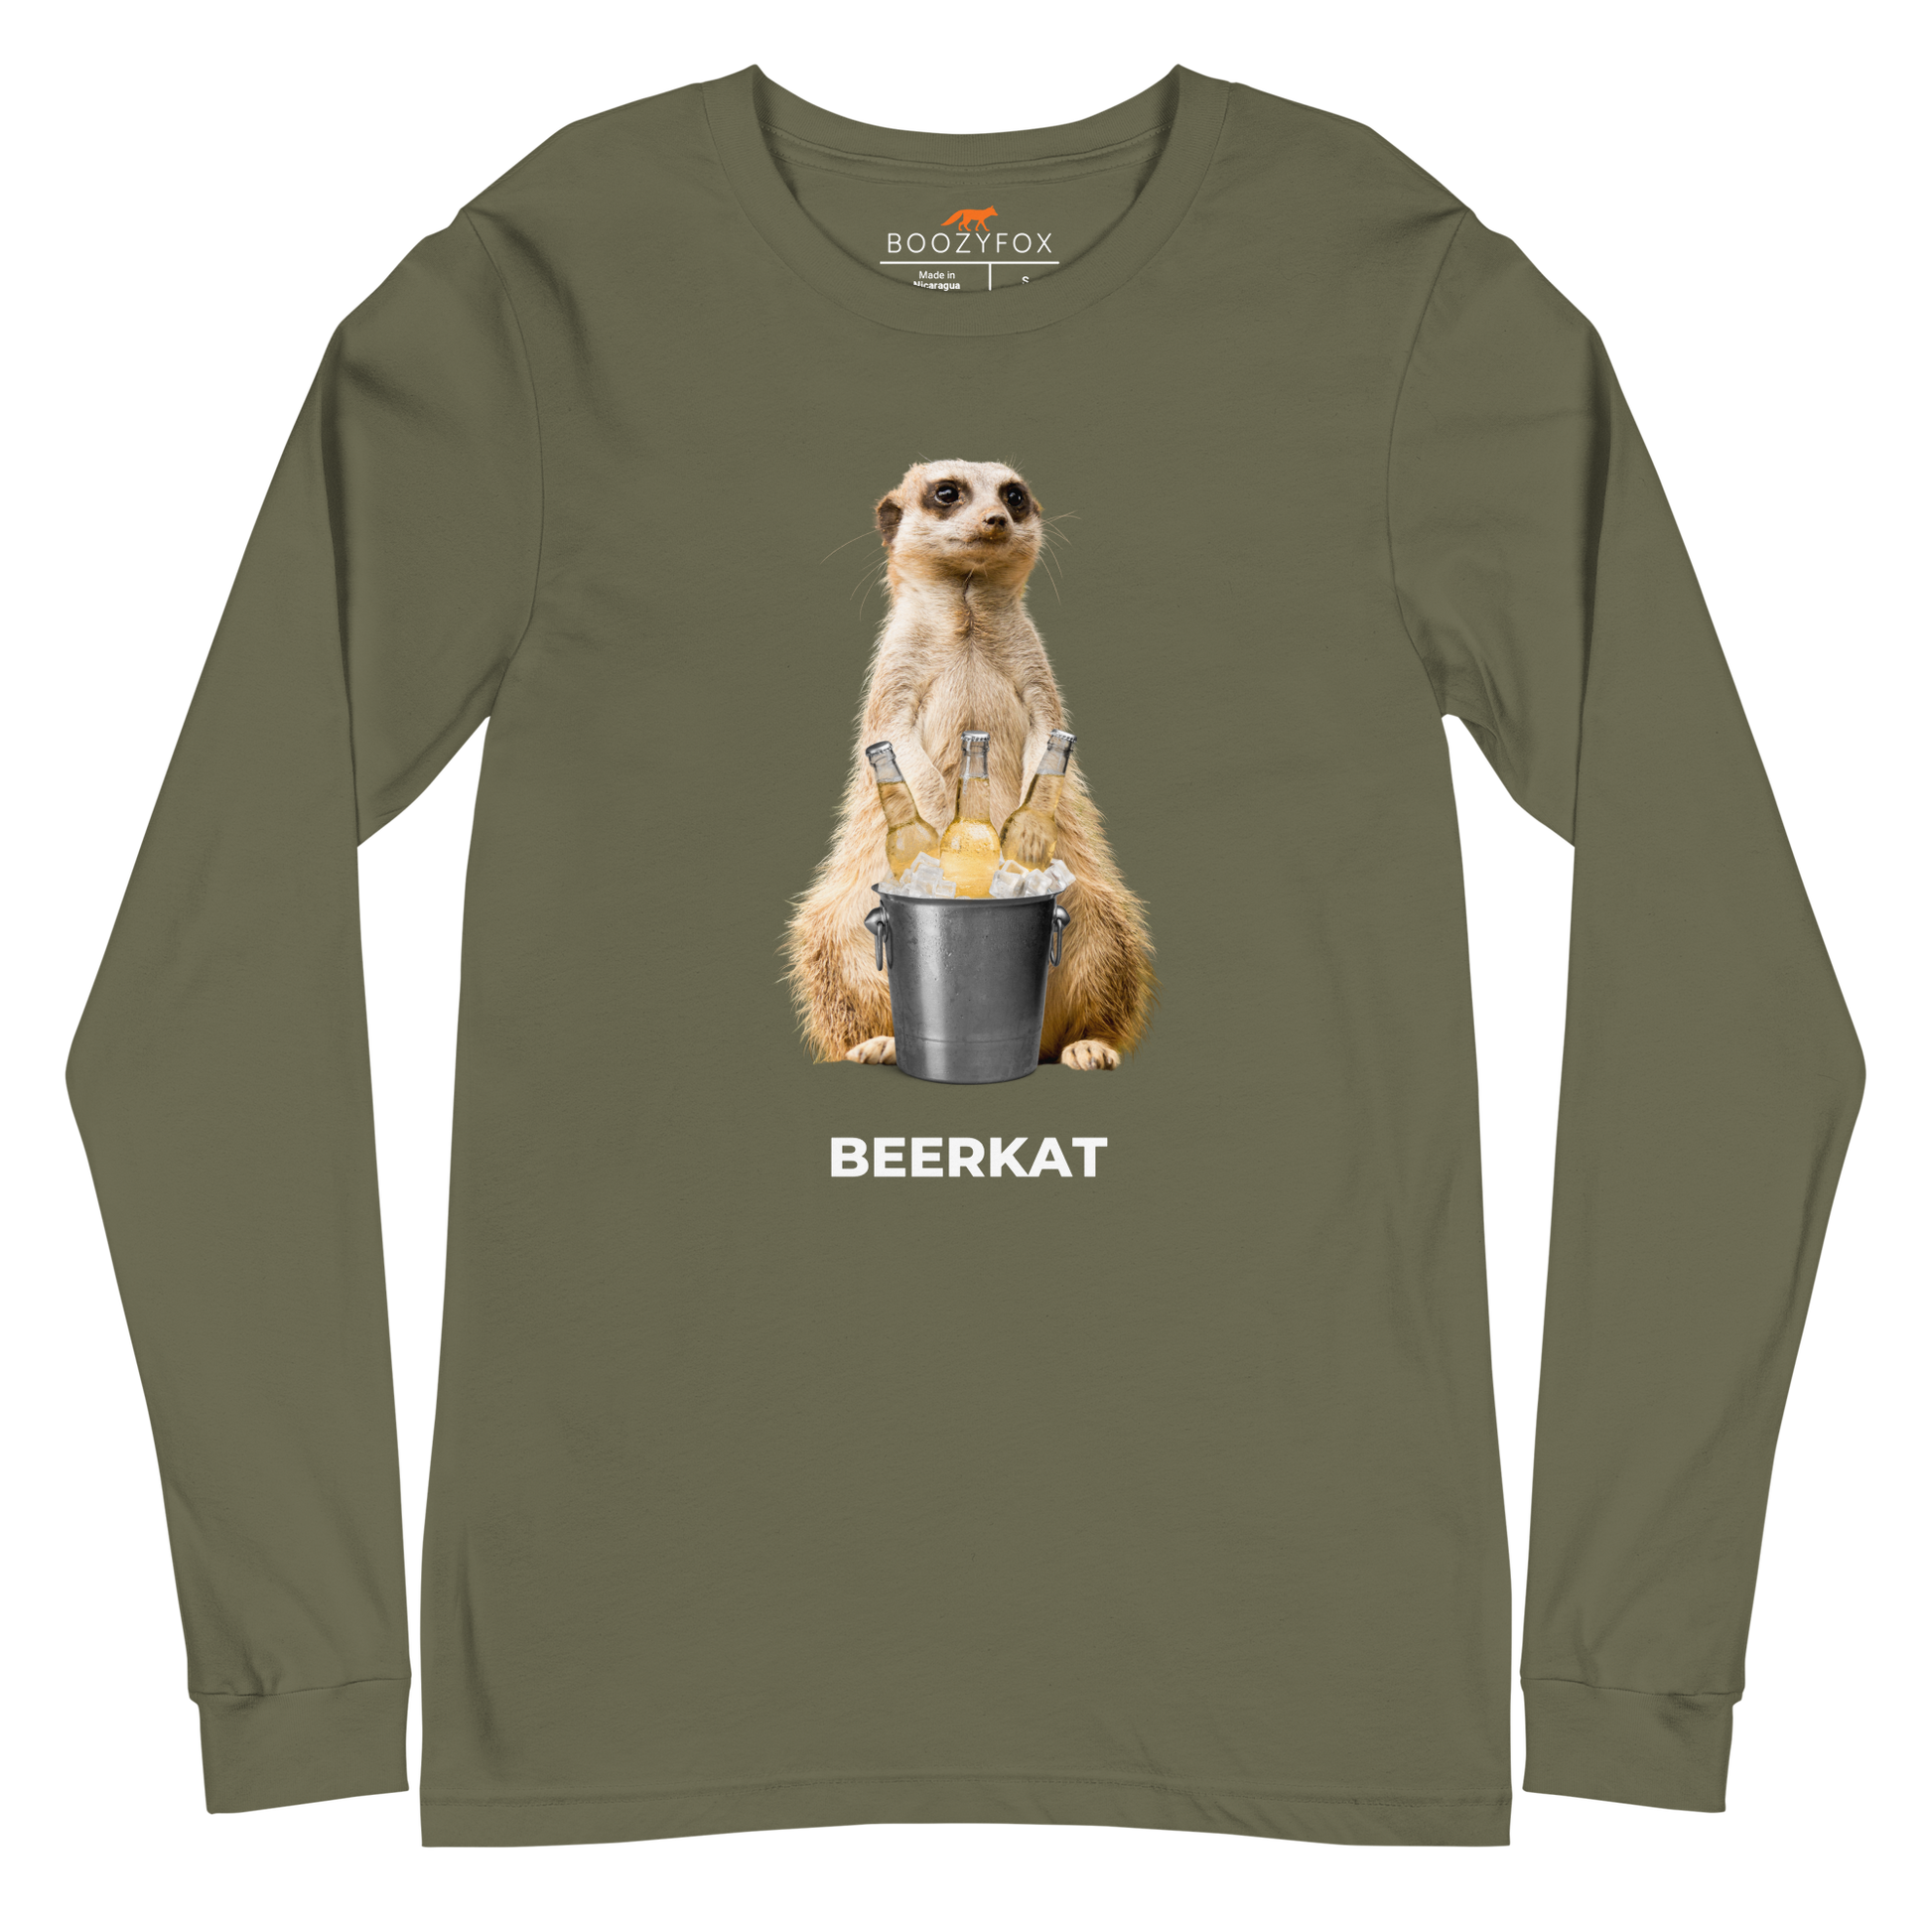 Military Green Meerkat Long Sleeve Tee featuring a hilarious Beerkat graphic on the chest - Funny Meerkat Long Sleeve Graphic Tees - Boozy Fox